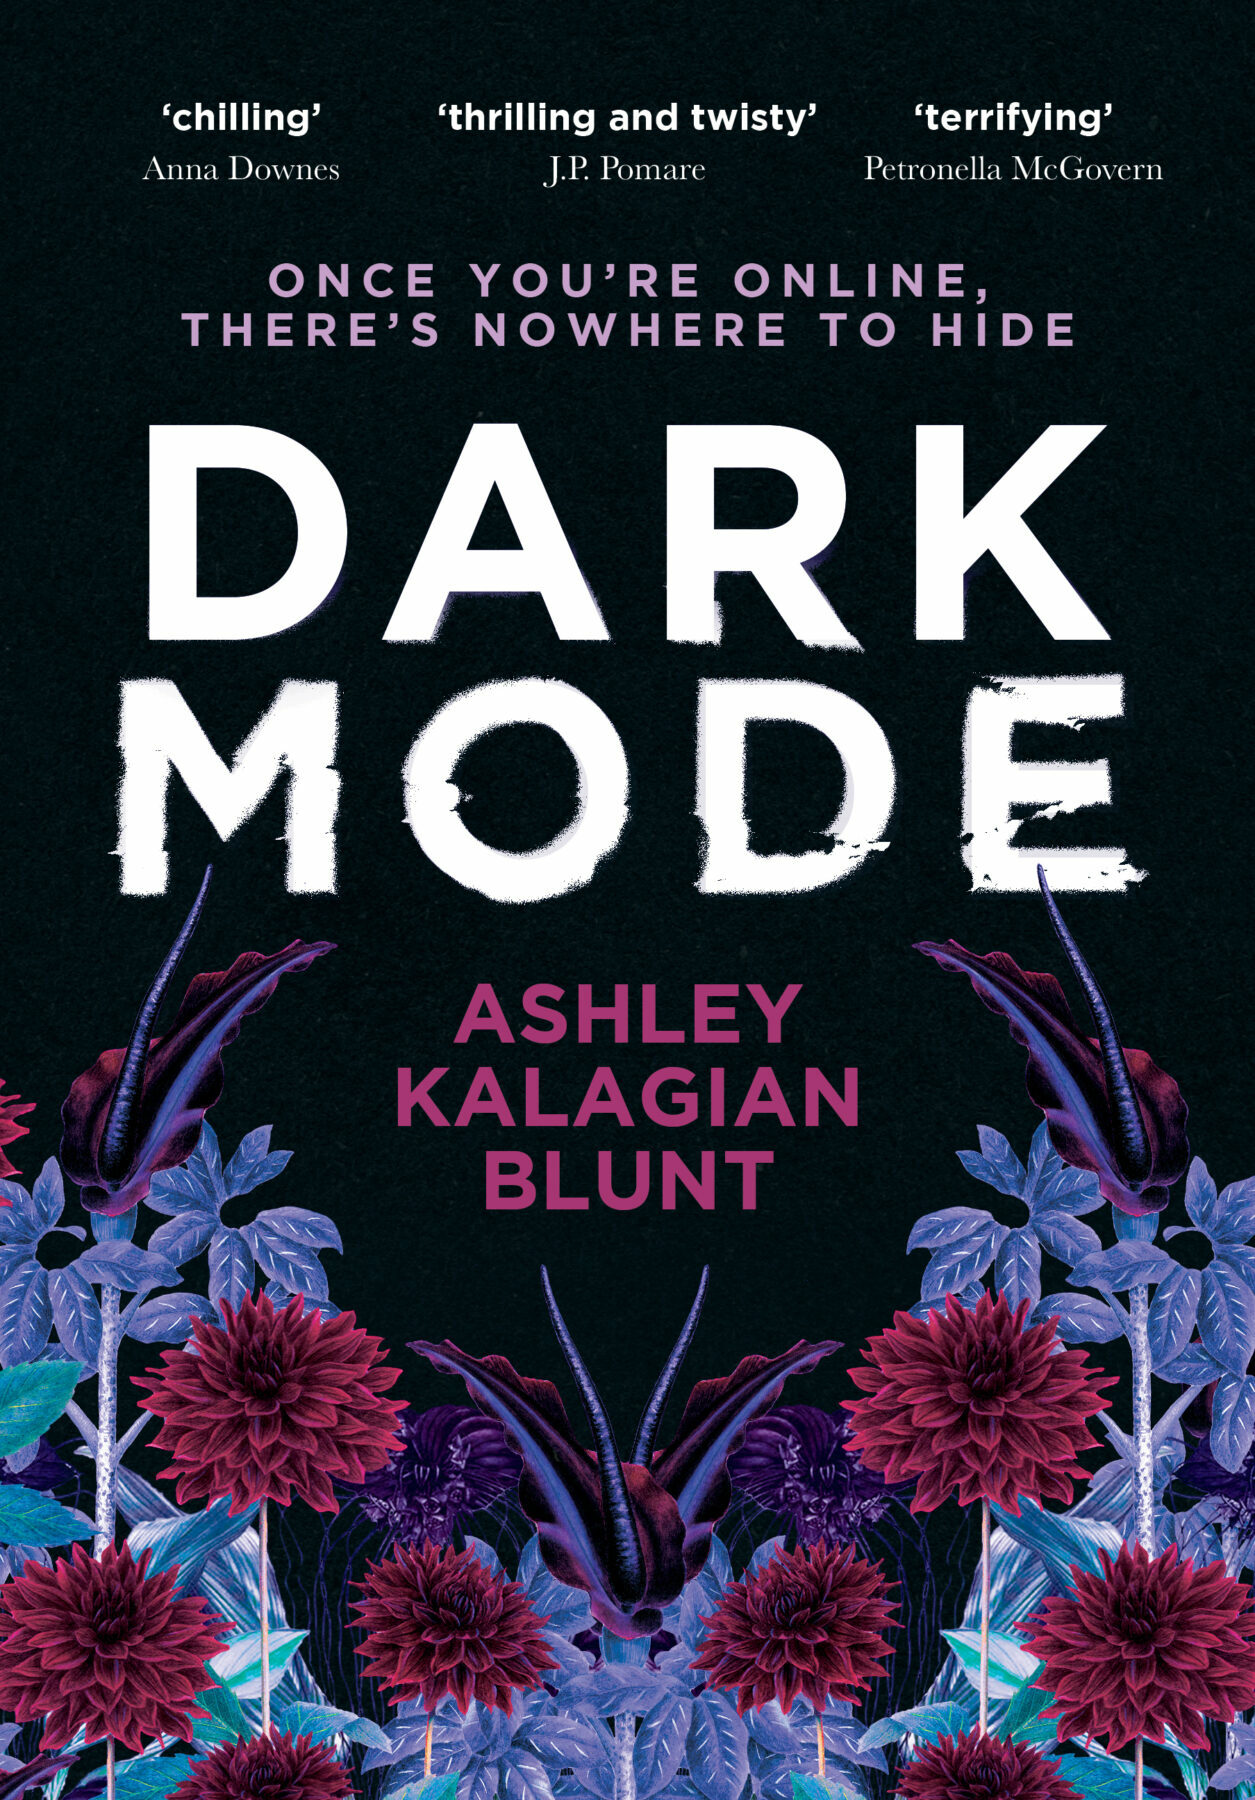 A book cover featuring dark red flowers and blue-gray leaves against a black background and the title in large white letters above